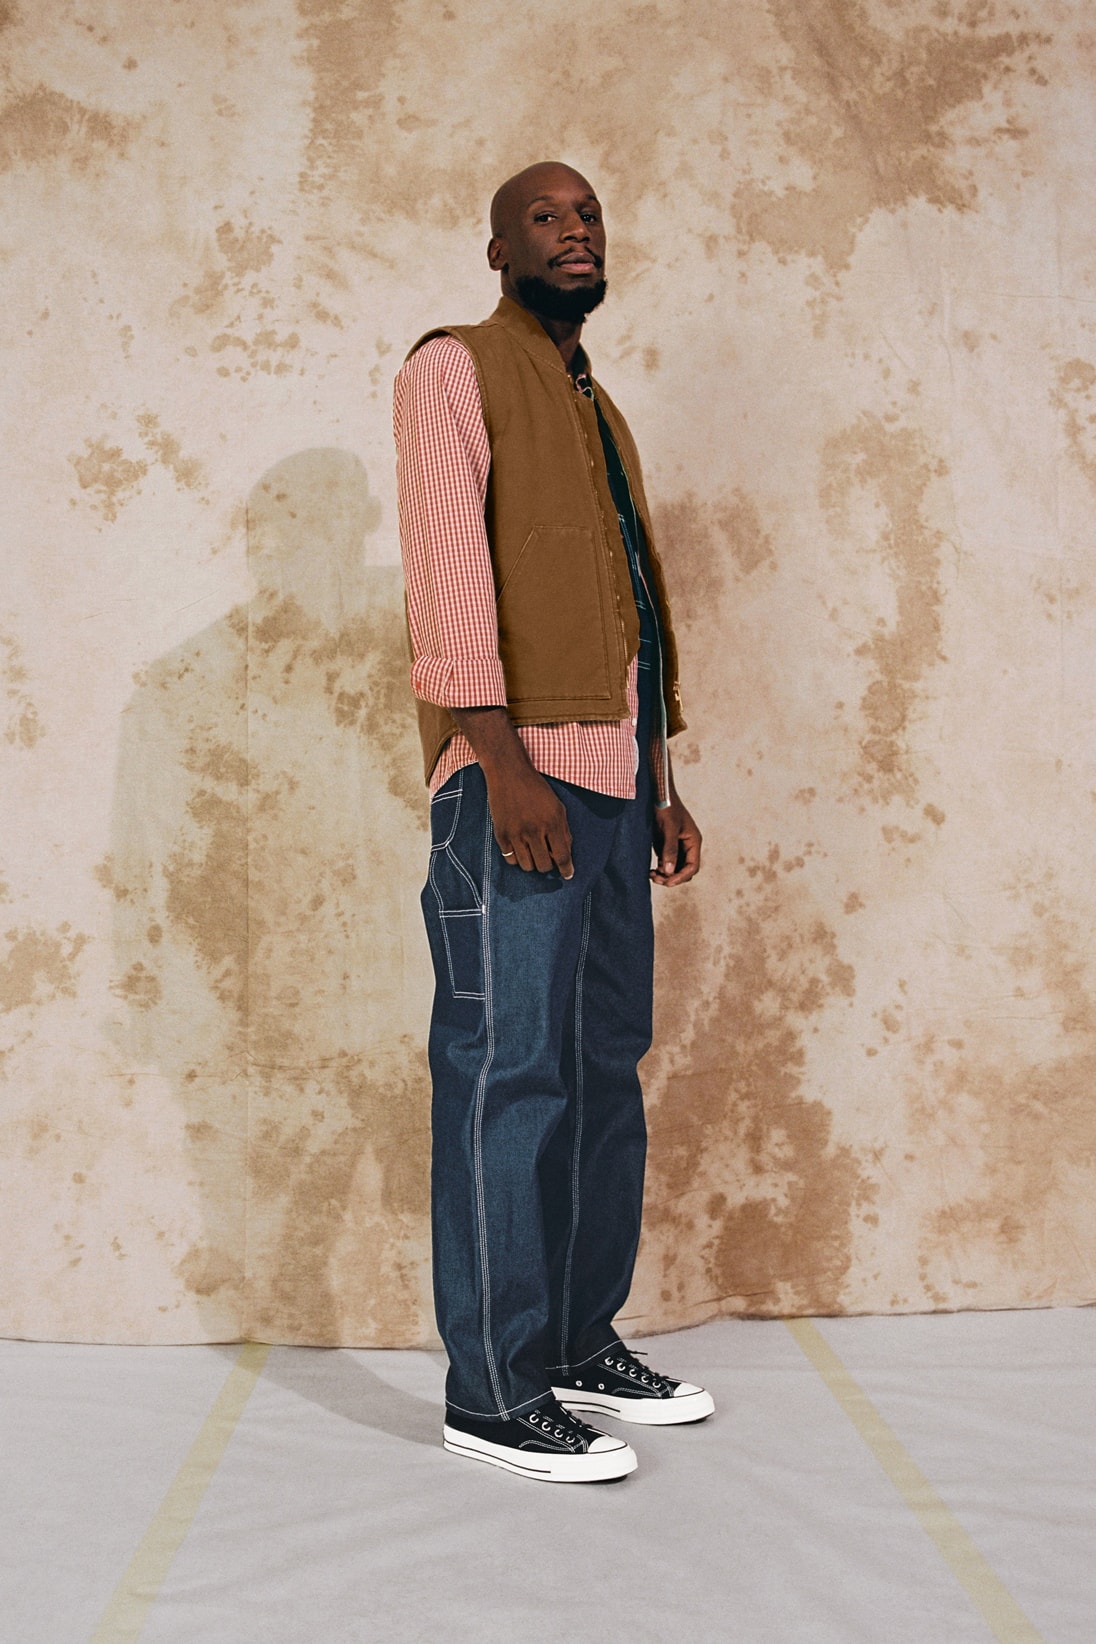 Carhartt WIP Spring/Summer 2020 Collection Classic Vest Hamilton Brown Bib Overall Blue